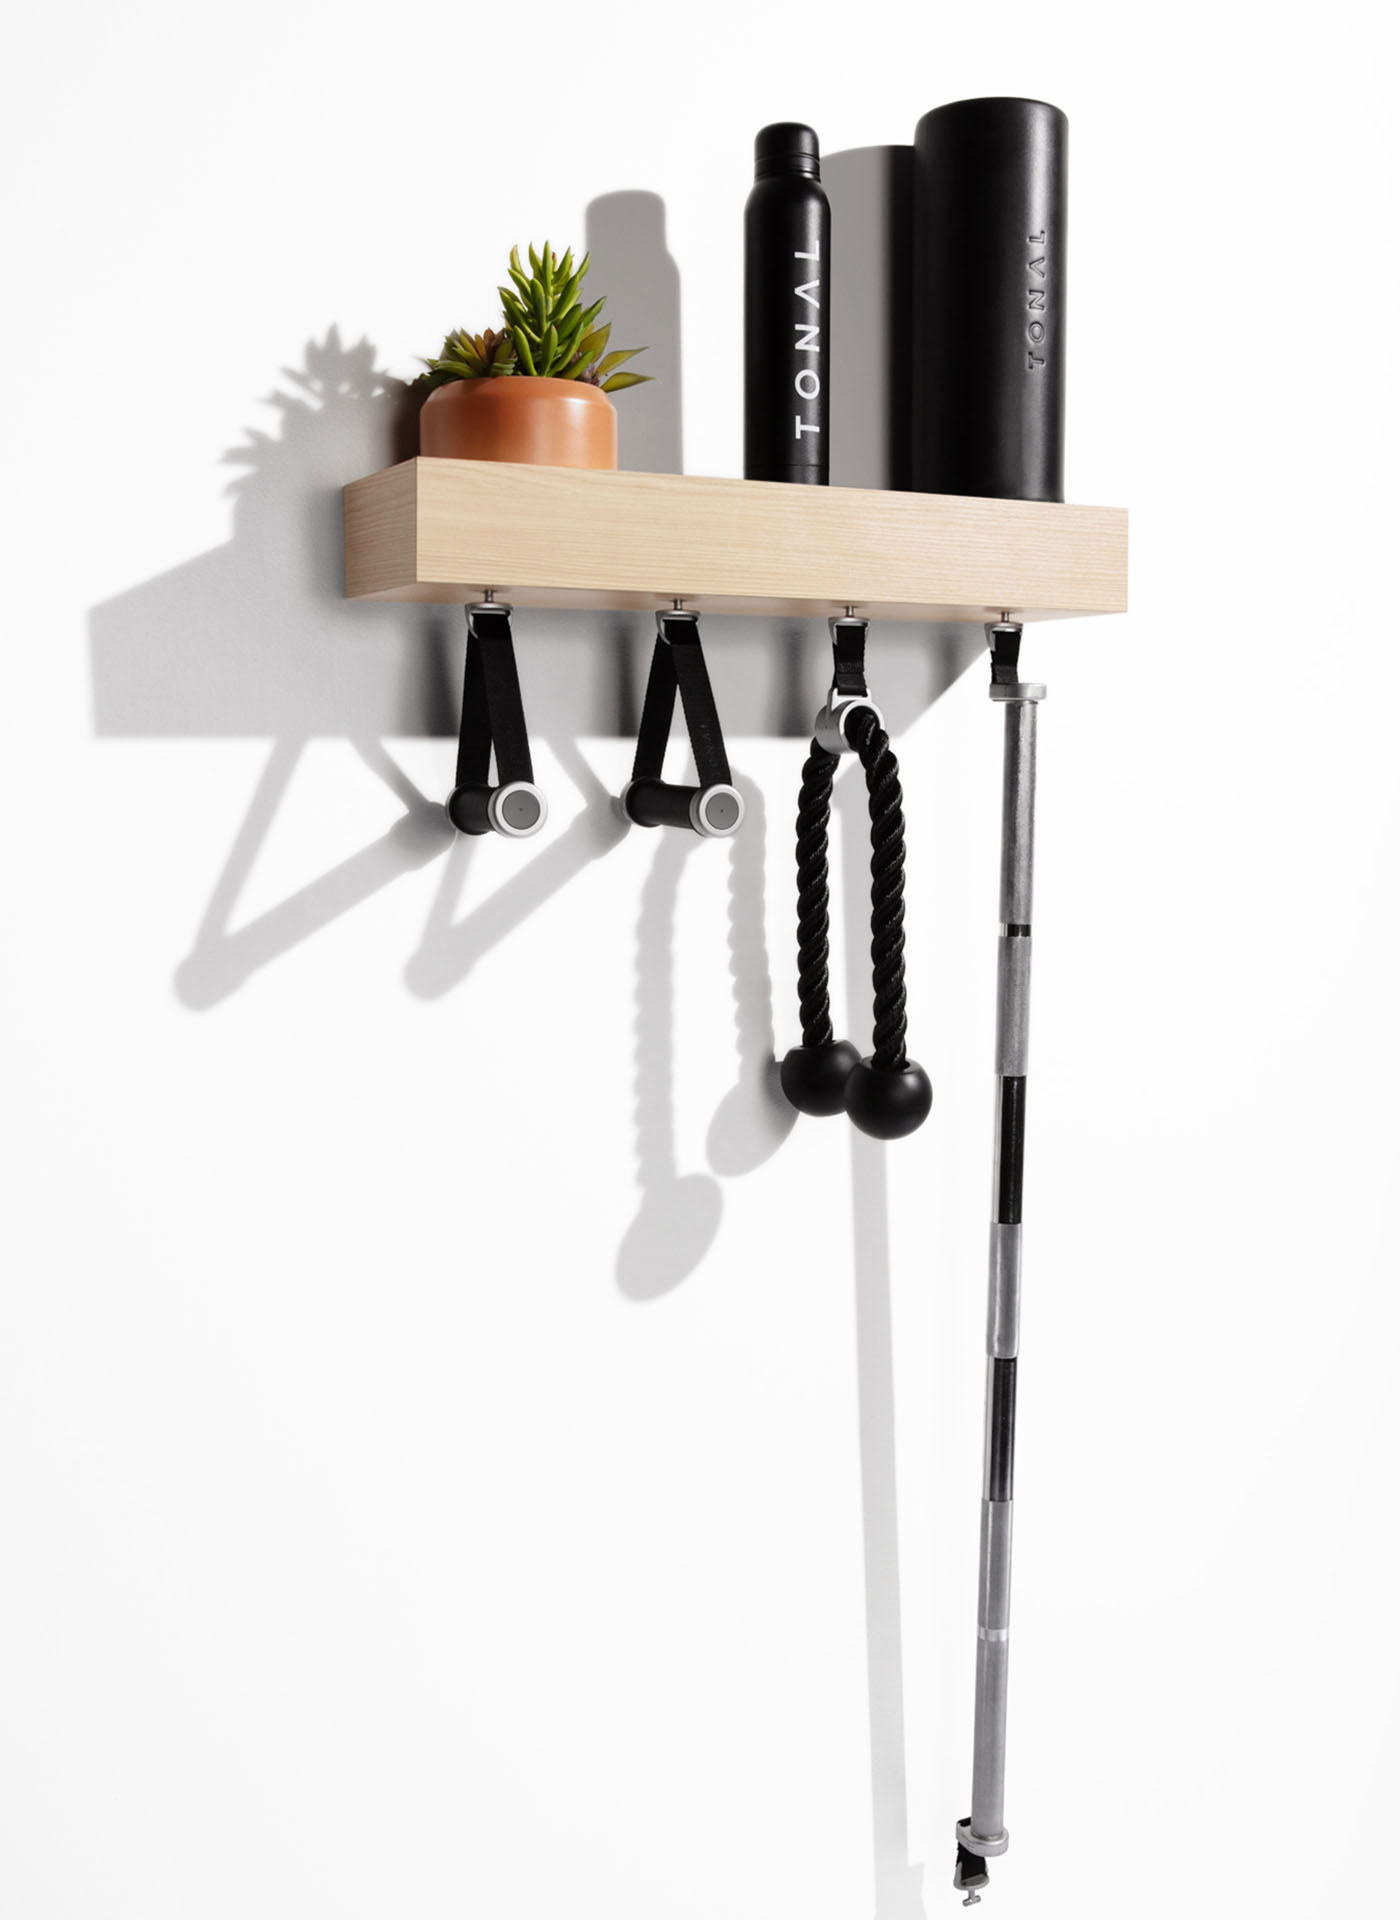 Tonal Accessories Shelf  Organize Your Workout Space